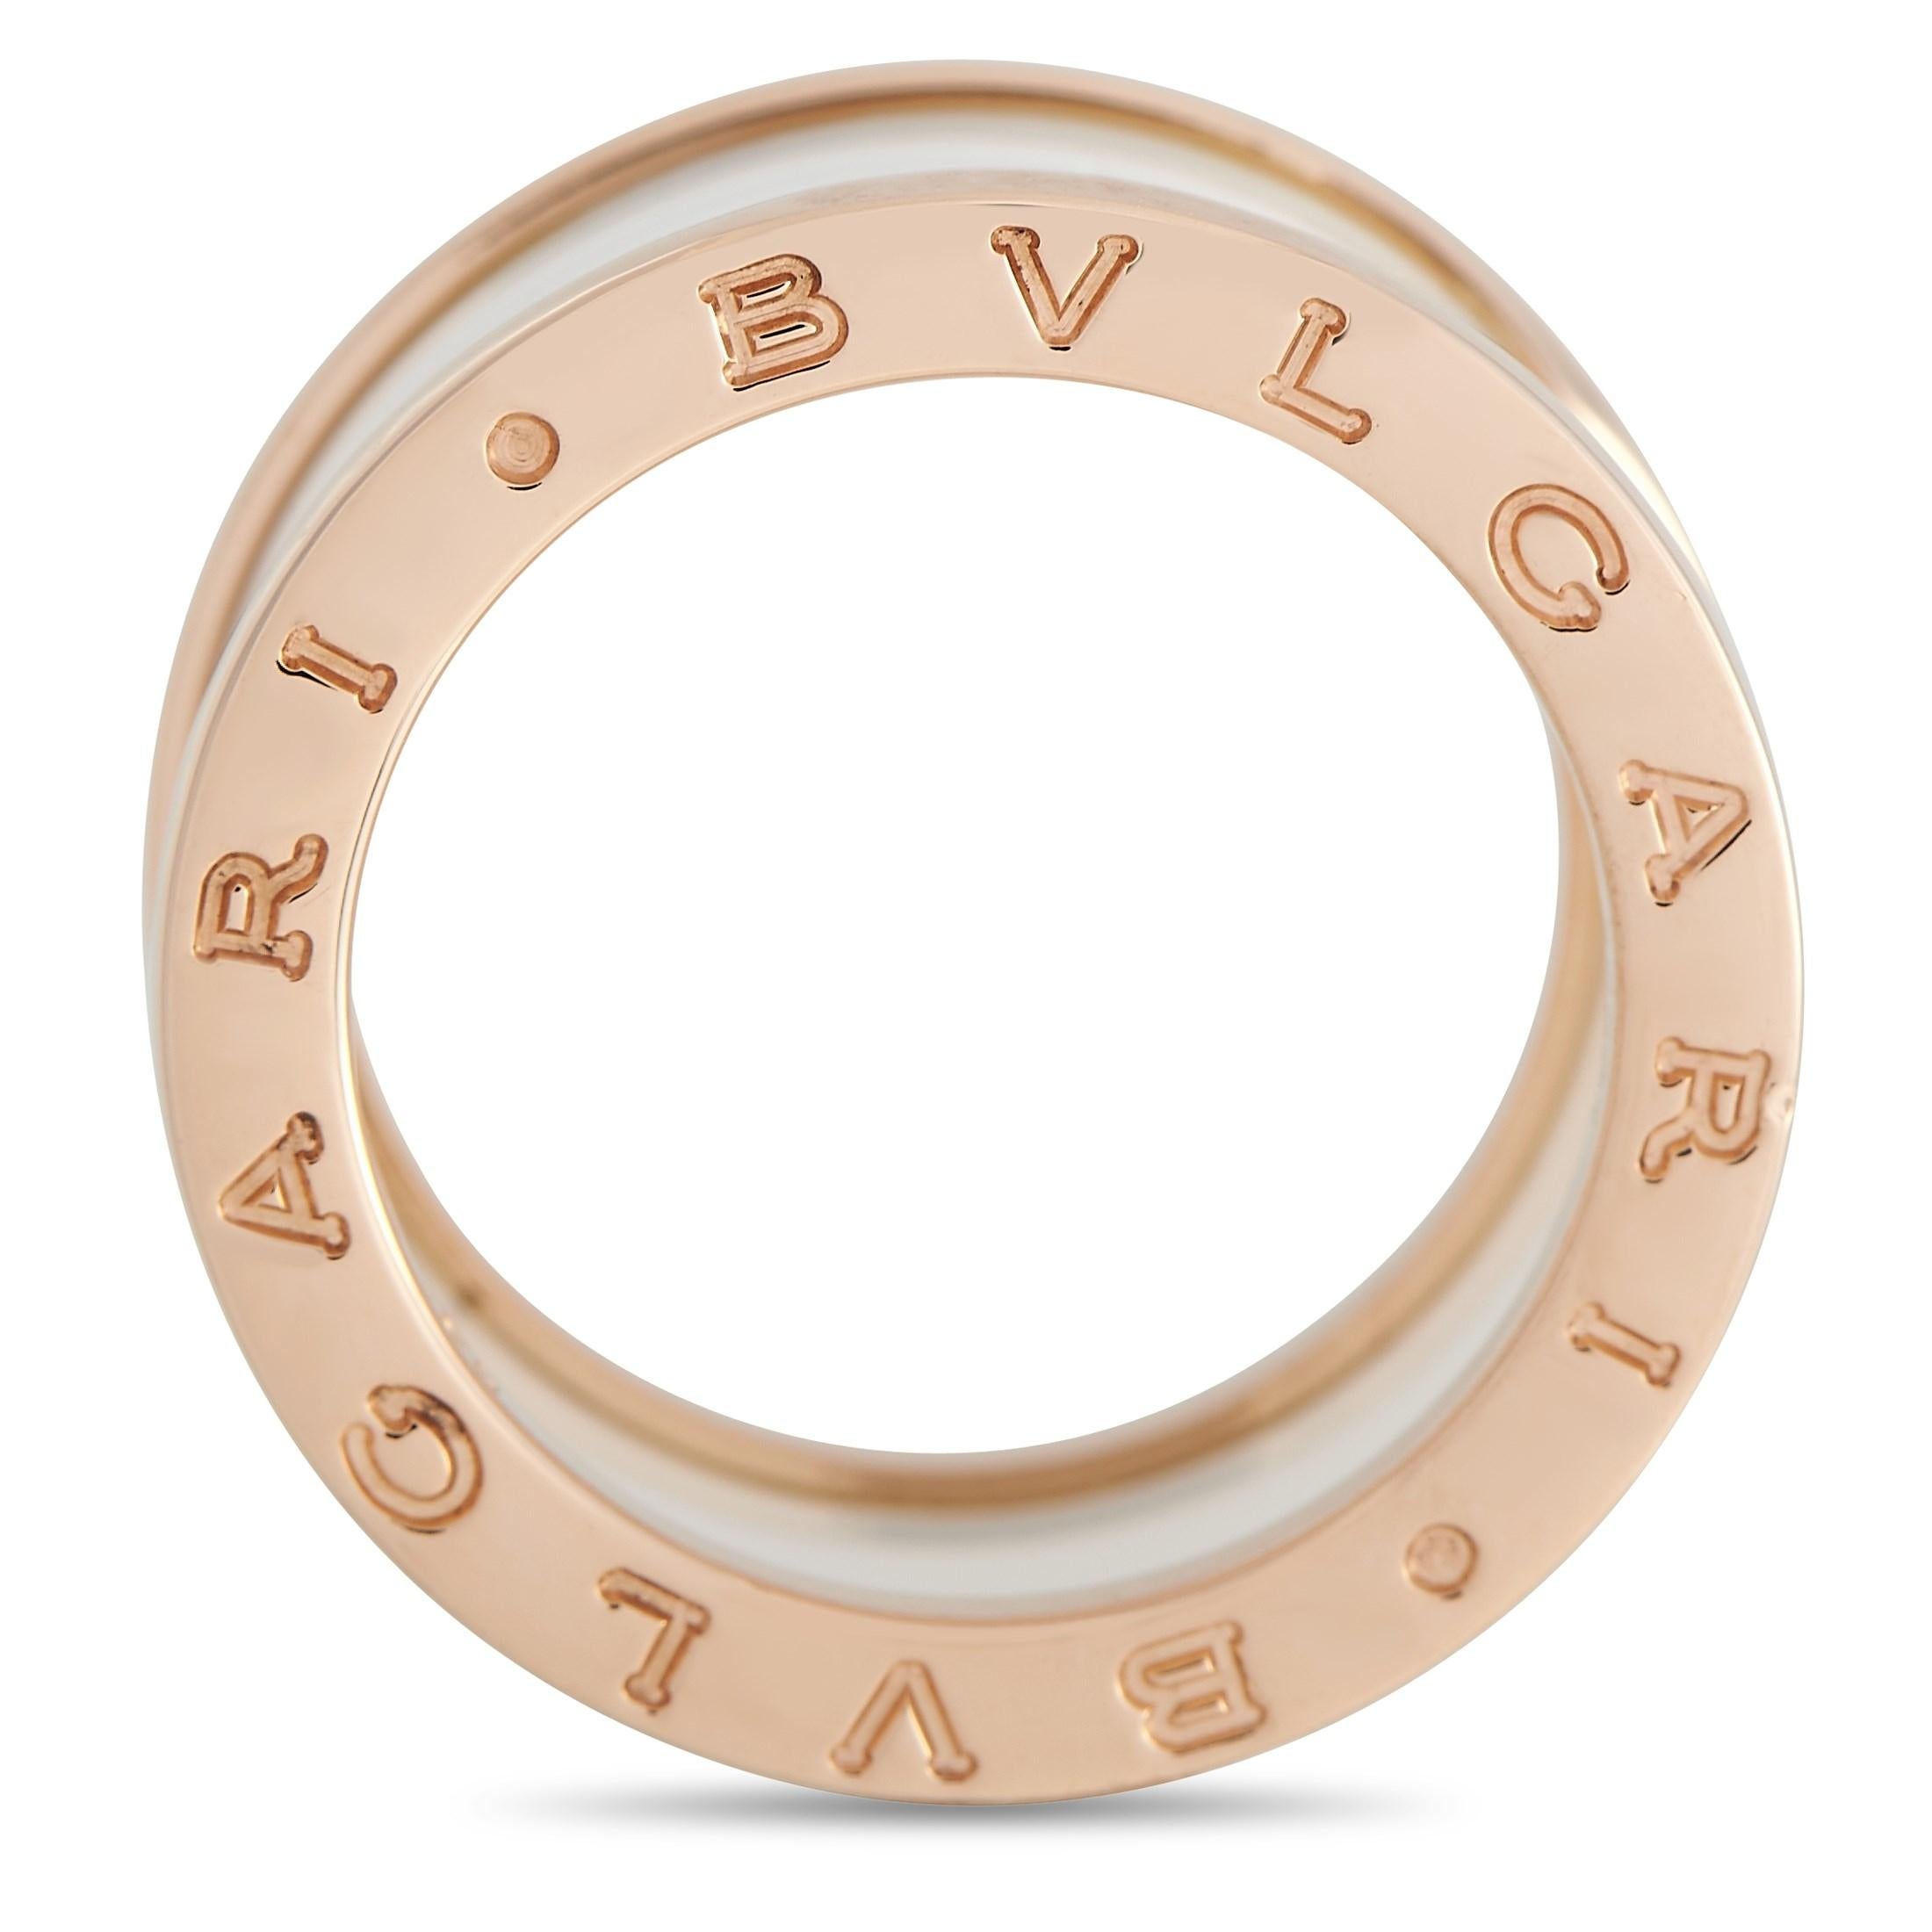 Shimmering 18K rose gold contrasts beautifully against a white ceramic center on this sleek, sophisticated Bvlgari ring from the B.Zero1 collection. This minimalist design measures 11mm wide and includes the luxury brand’s moniker imprinted on each